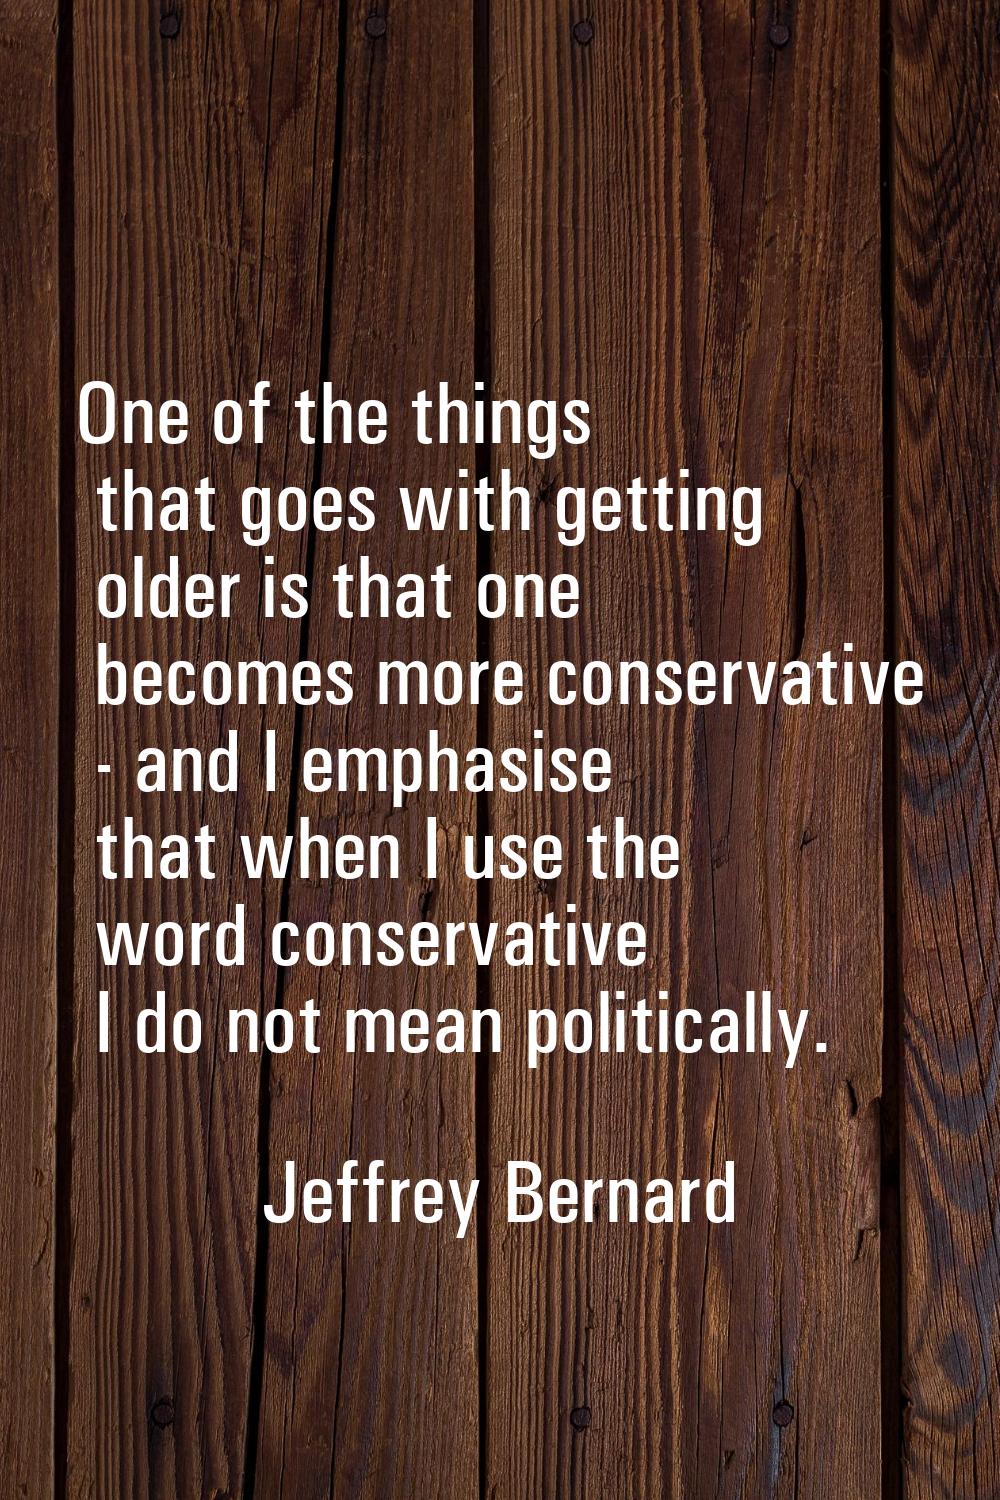 One of the things that goes with getting older is that one becomes more conservative - and I emphas